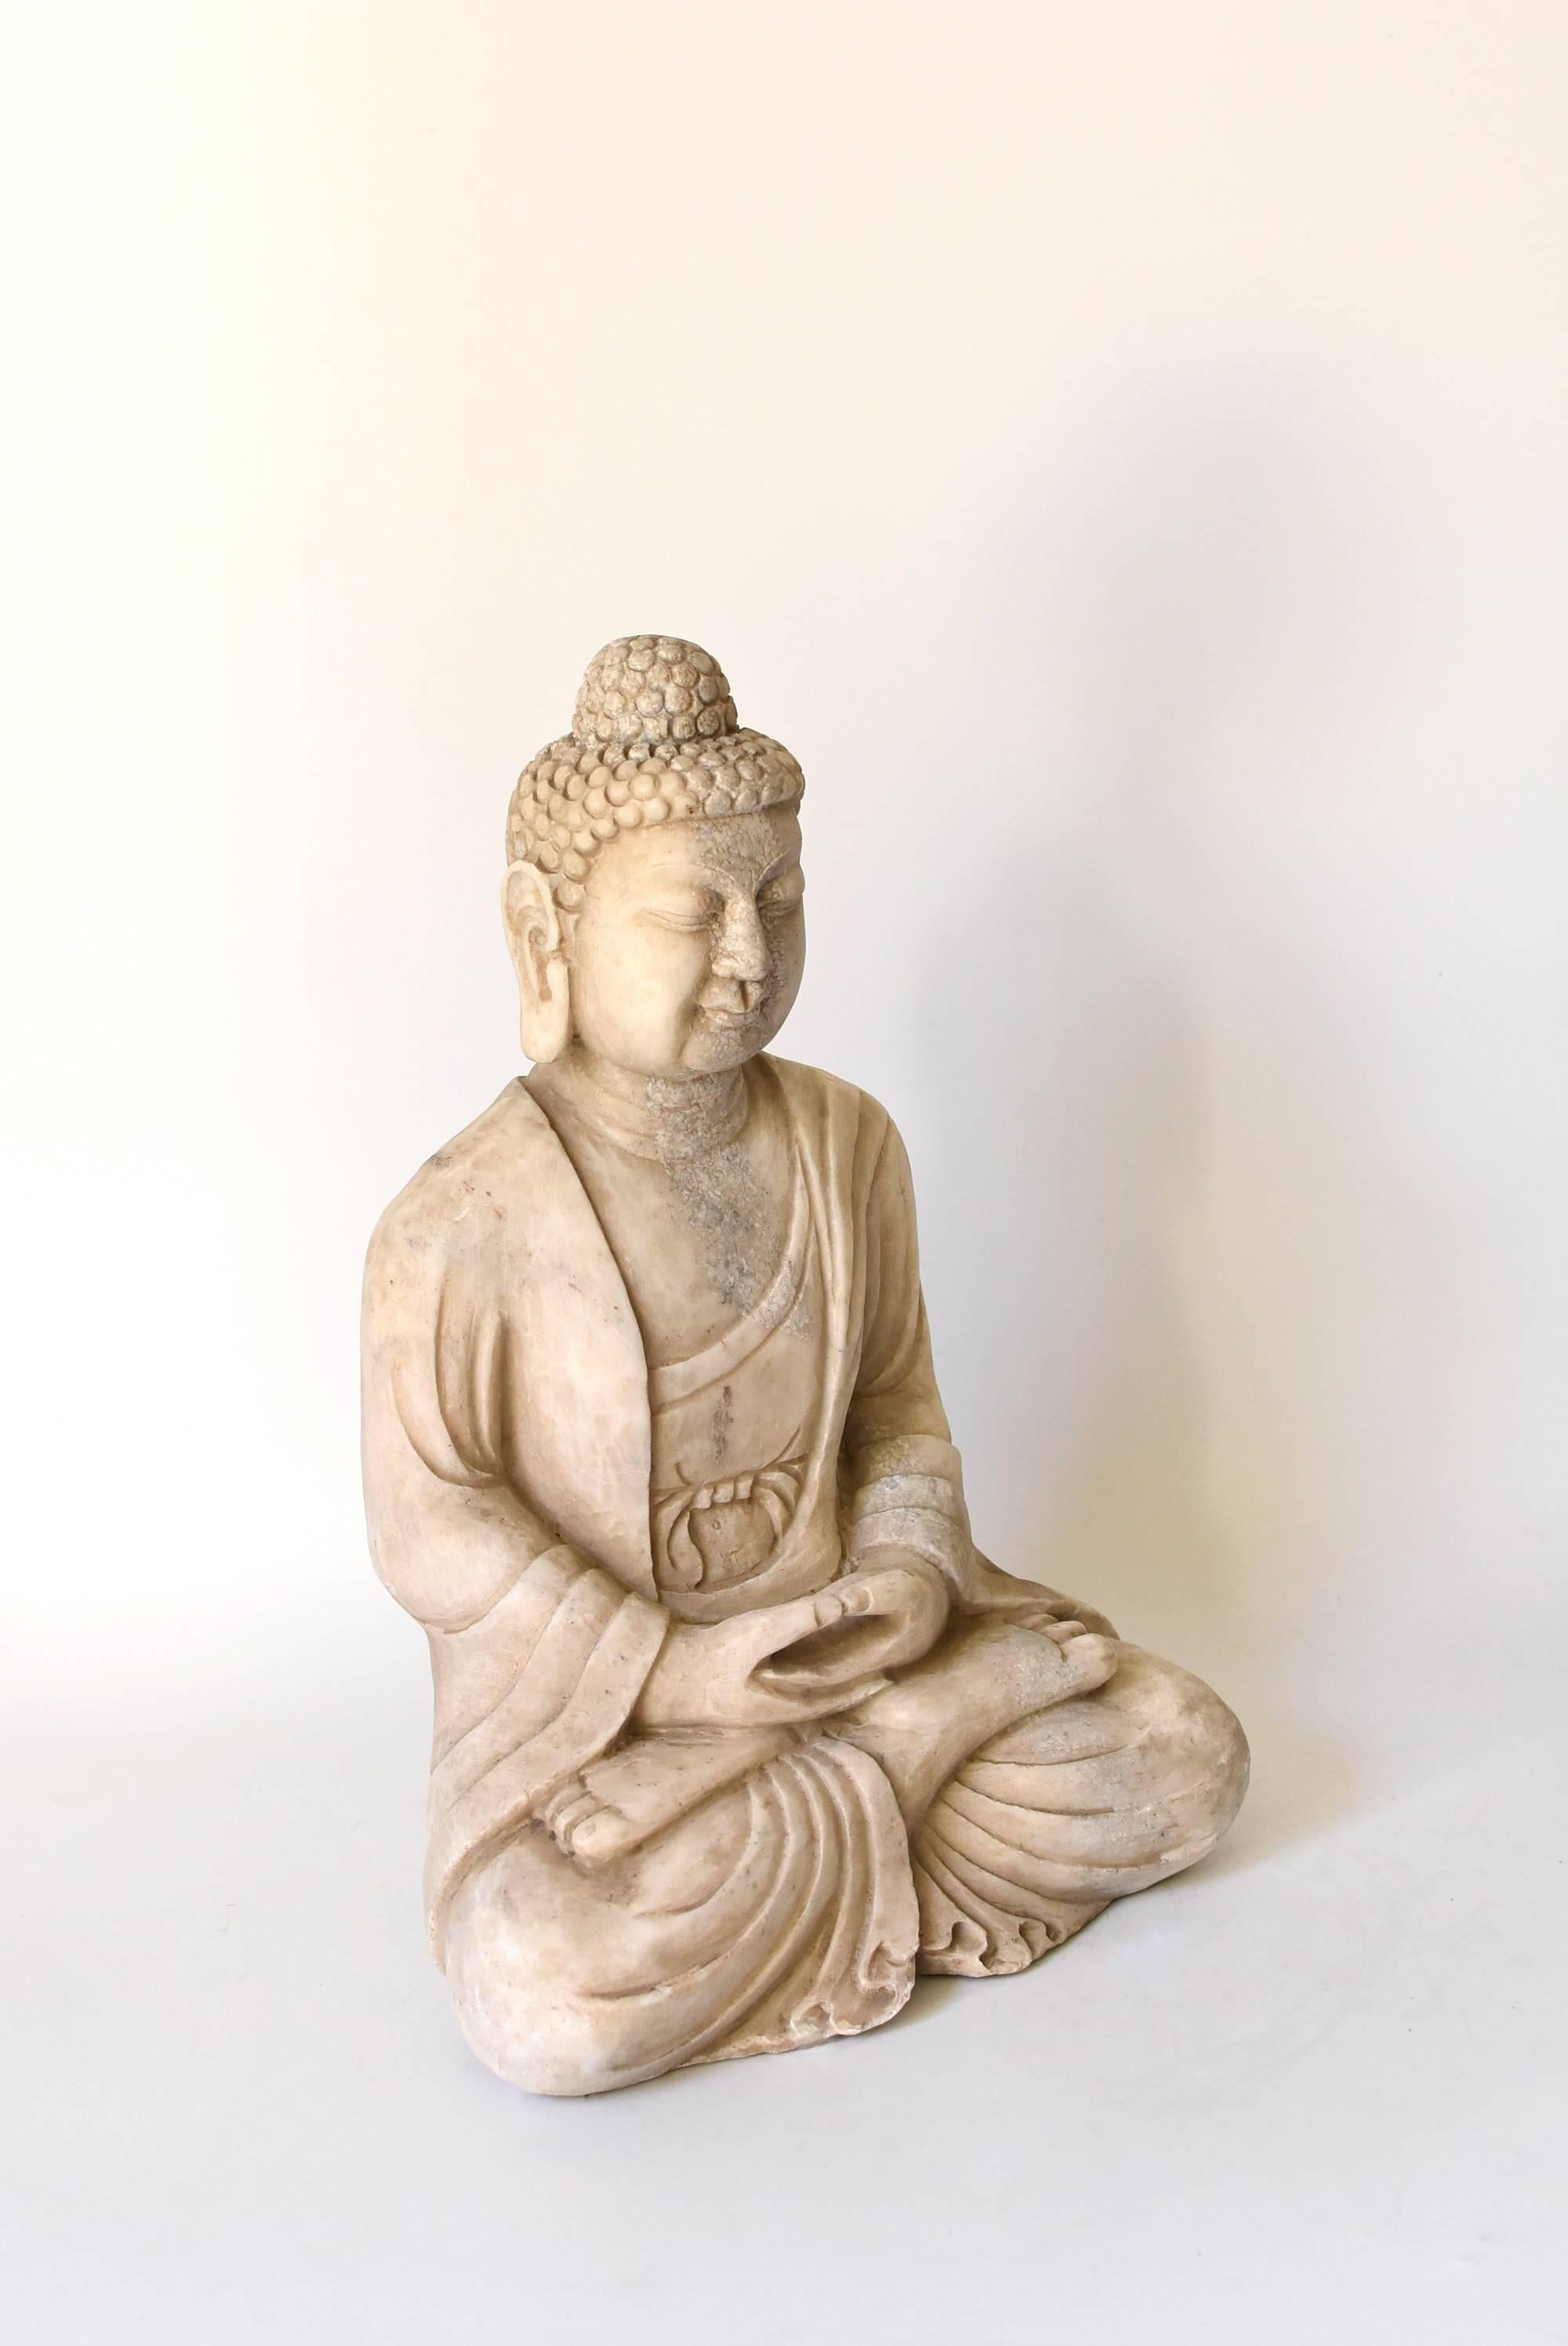 A beautiful Buddha statue hand-carved from solid marble. His facial expression and robe are well defined. Large earlobes and full face are features of Tang dynasty style. Buddha's special mudra with his fingers forming a circle expresses uniting the